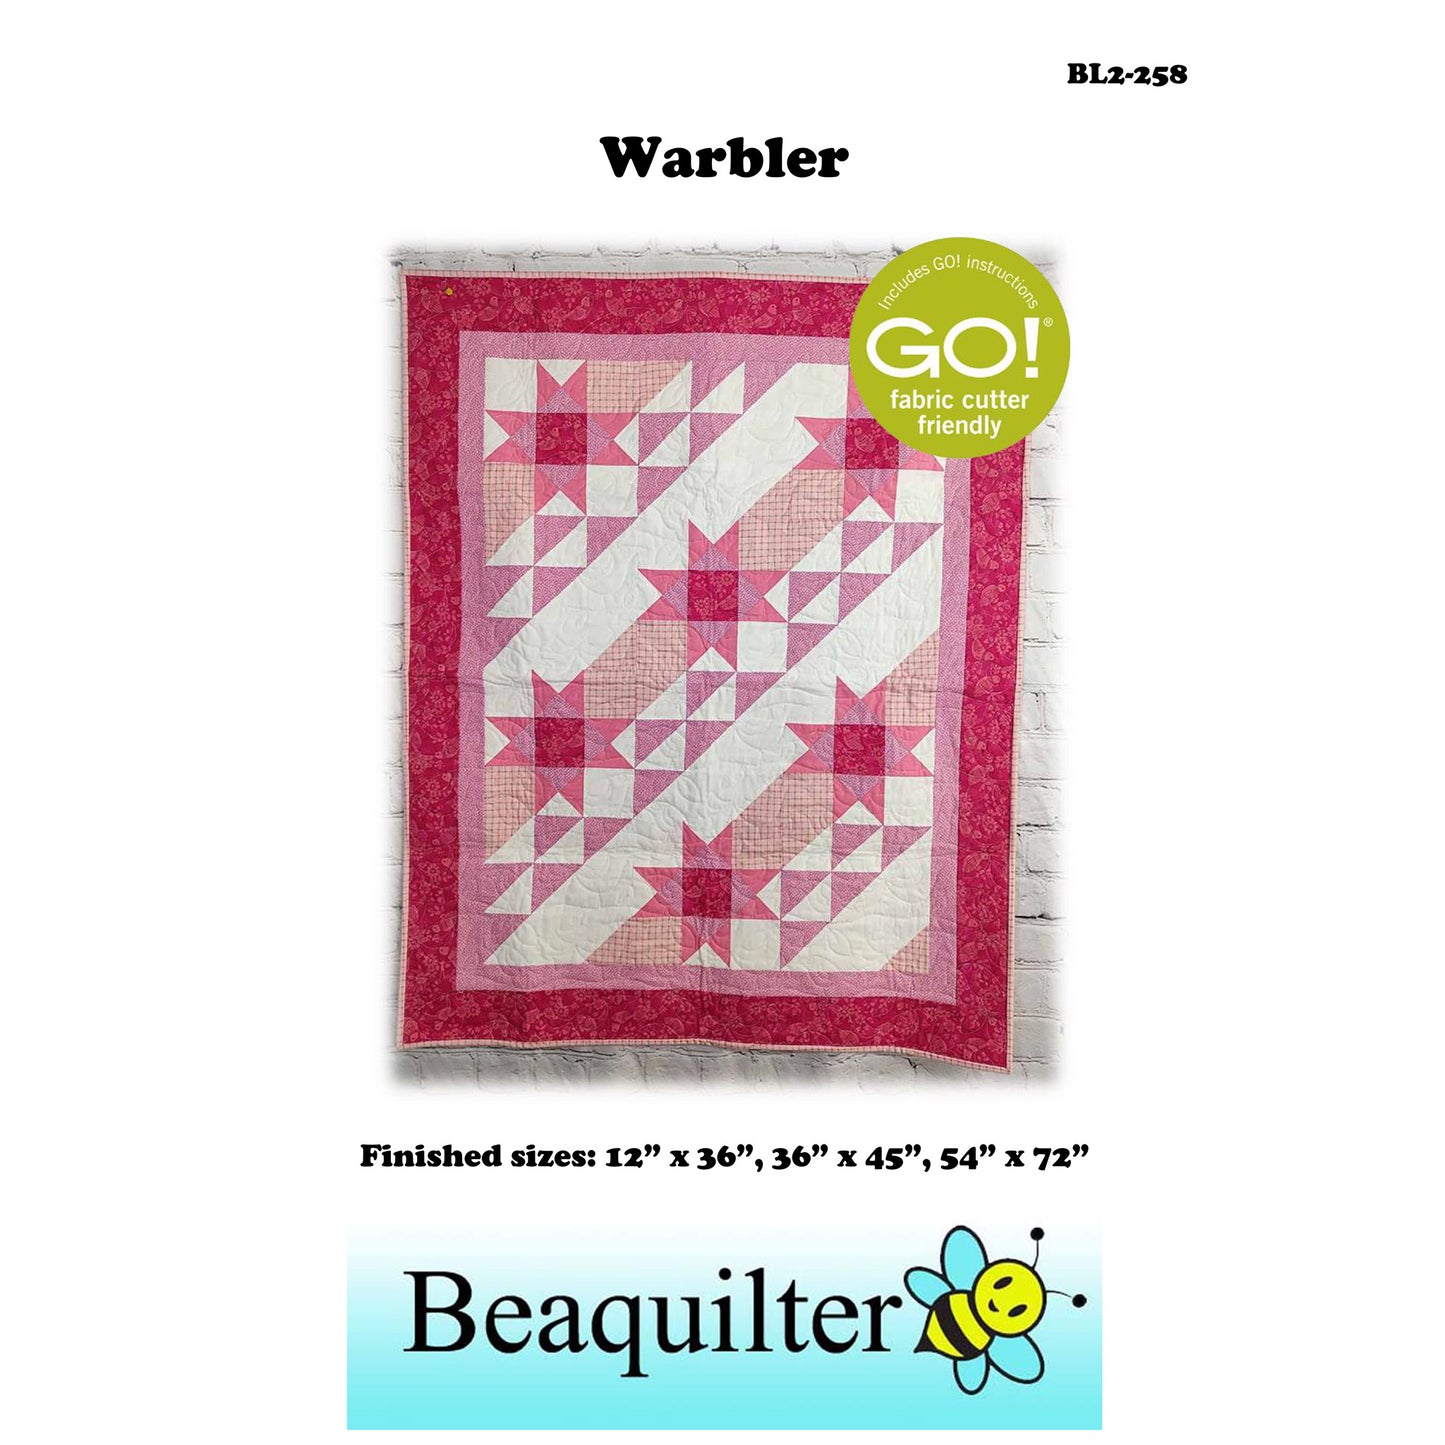 Beautiful quilt in pinks and white fabric with stars and diagnal rows of white, pinks and white and pink triangles.